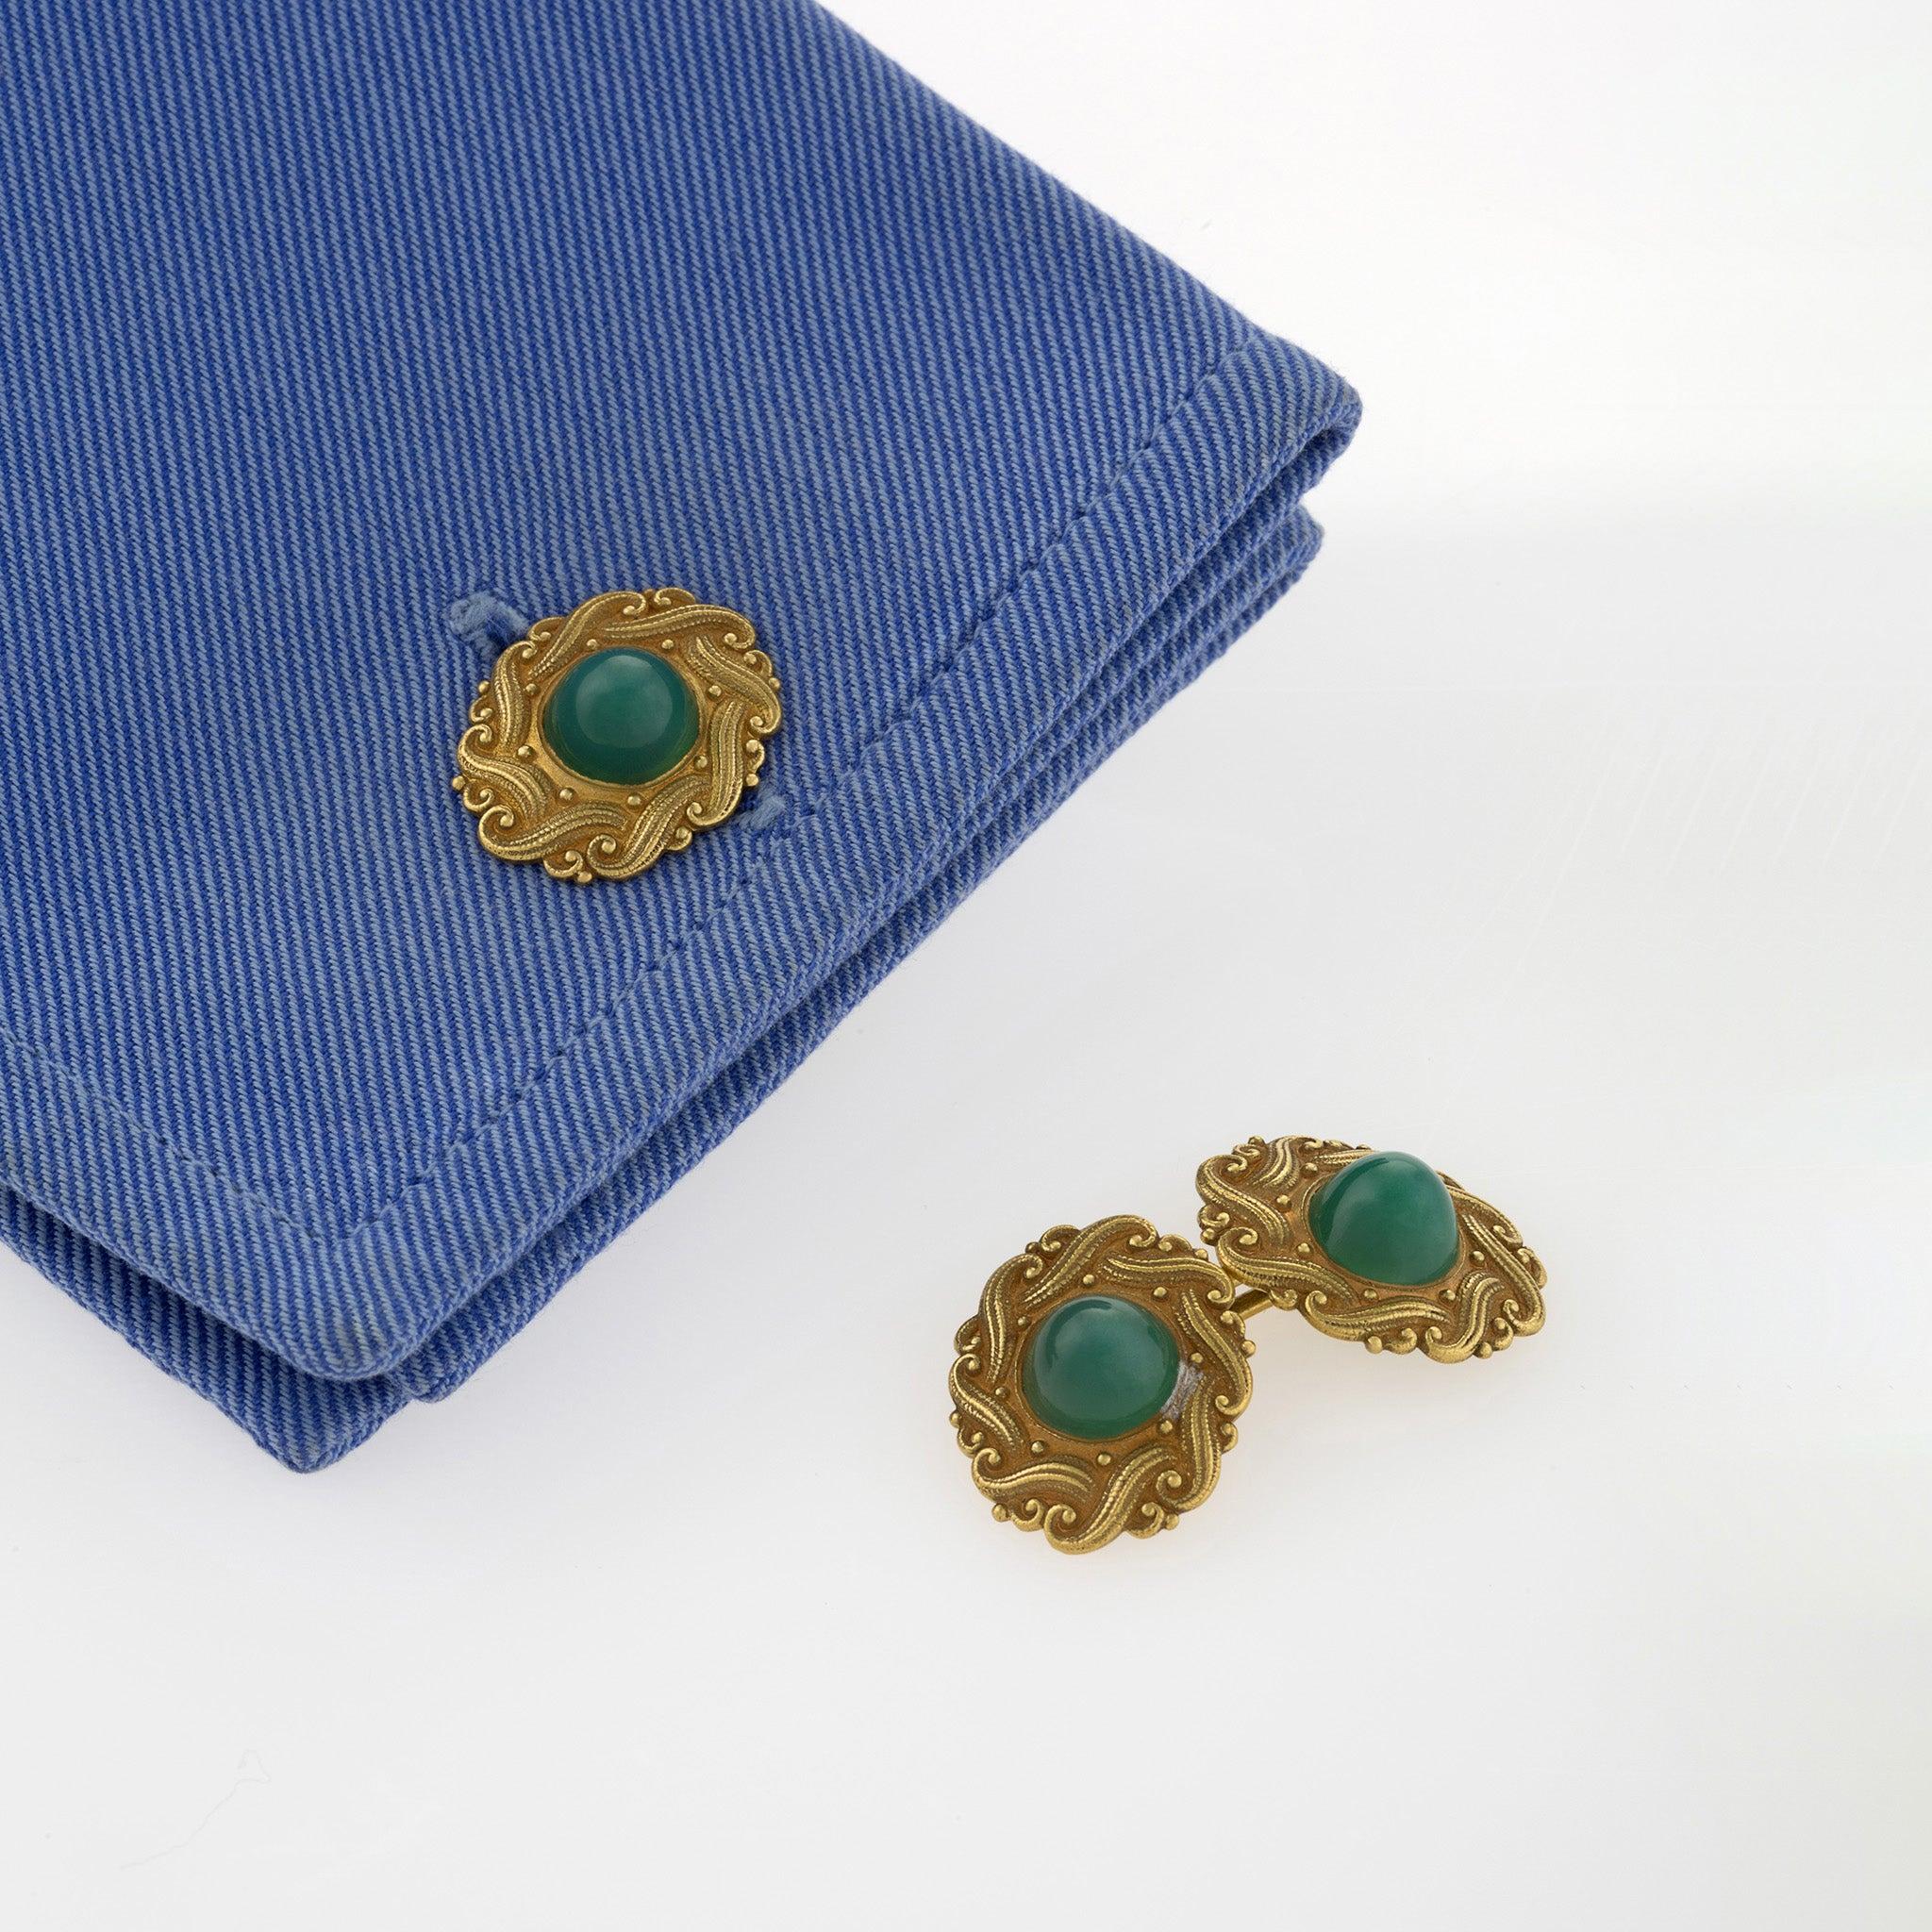 These European Art Nouveau 18K gold chrysoprase or green chalcedony cuff links  date from c. 1900. They are designed as double oval links, each set with a sugar loaf chrysoprase cabochon within a polished, chased and engraved surround of